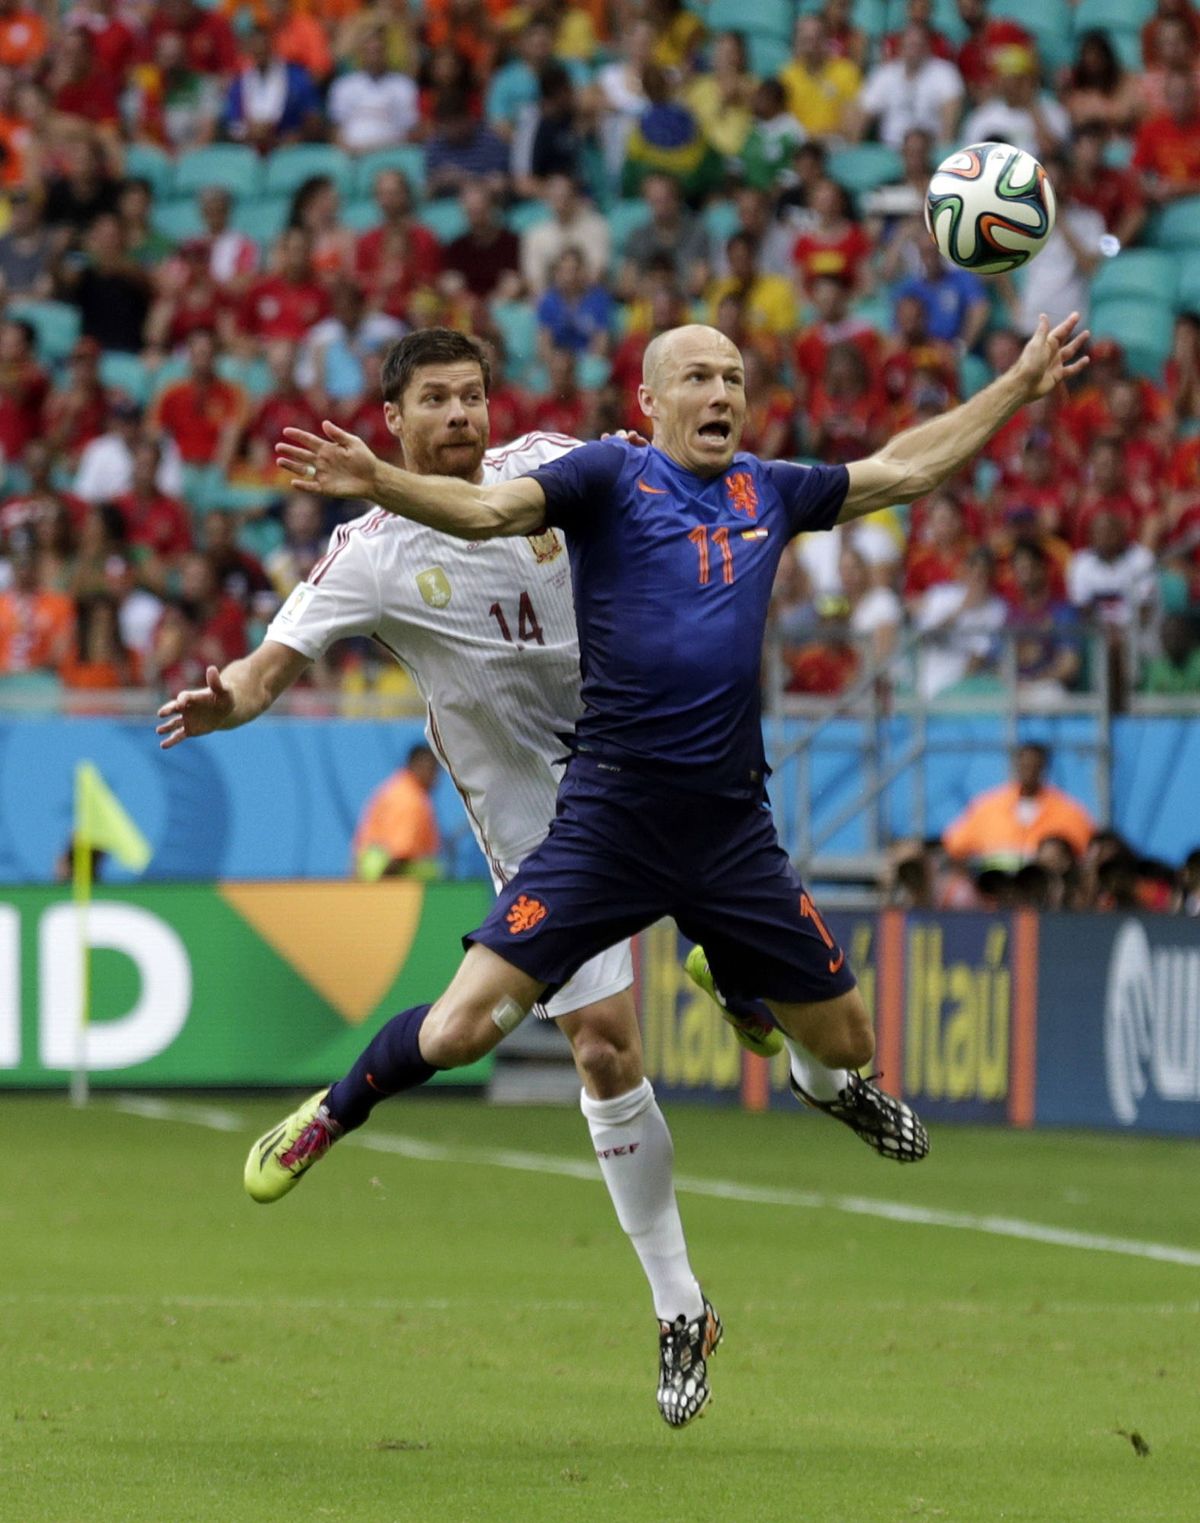 Spain midfielder Xabi Alonso (14) and Netherlands forward Arjen Robben tussel for the ball during the first half in Salvador, Brazil. (Associated Press)